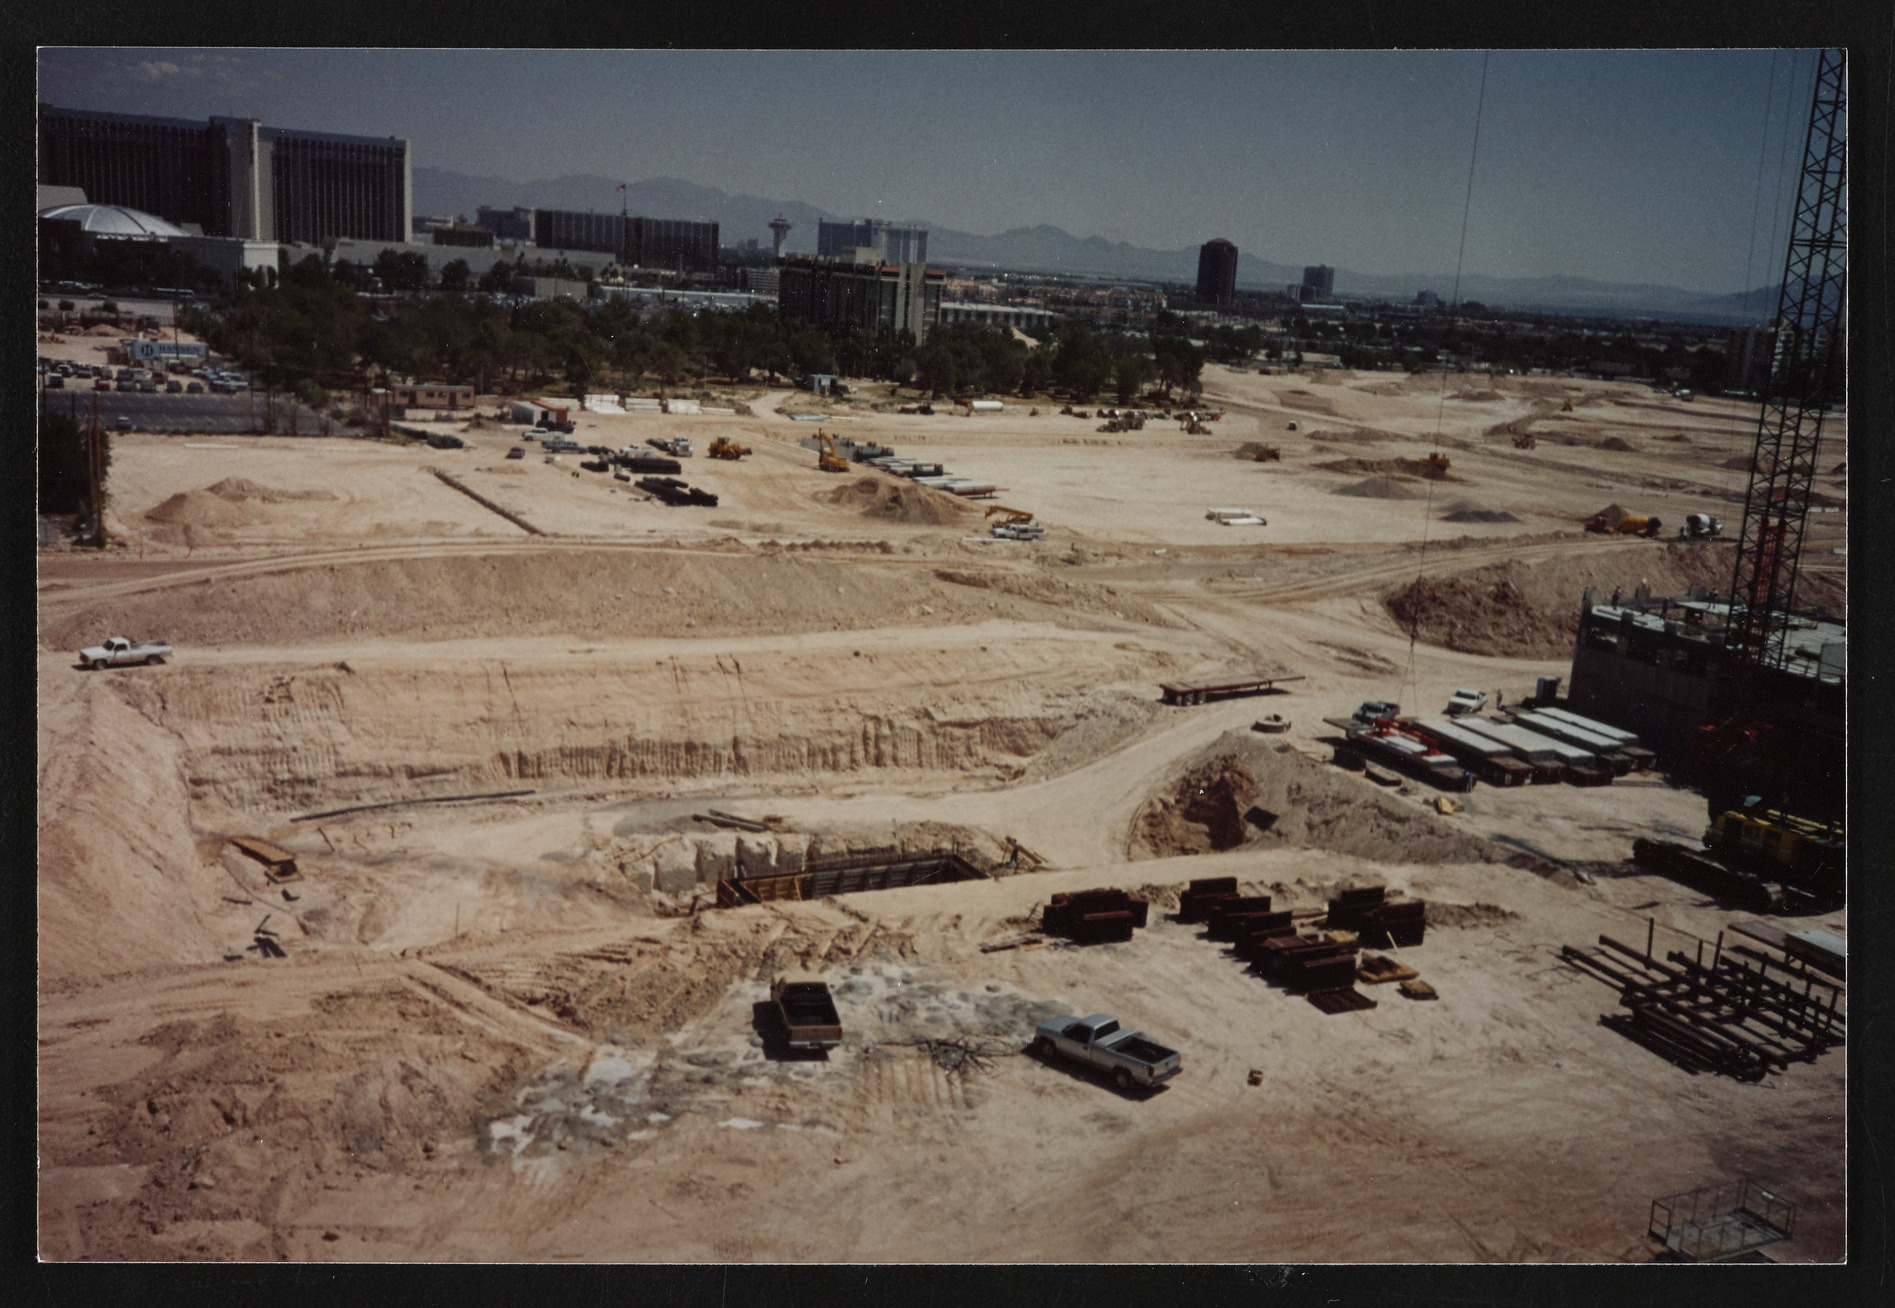 MGM construction party, image 32